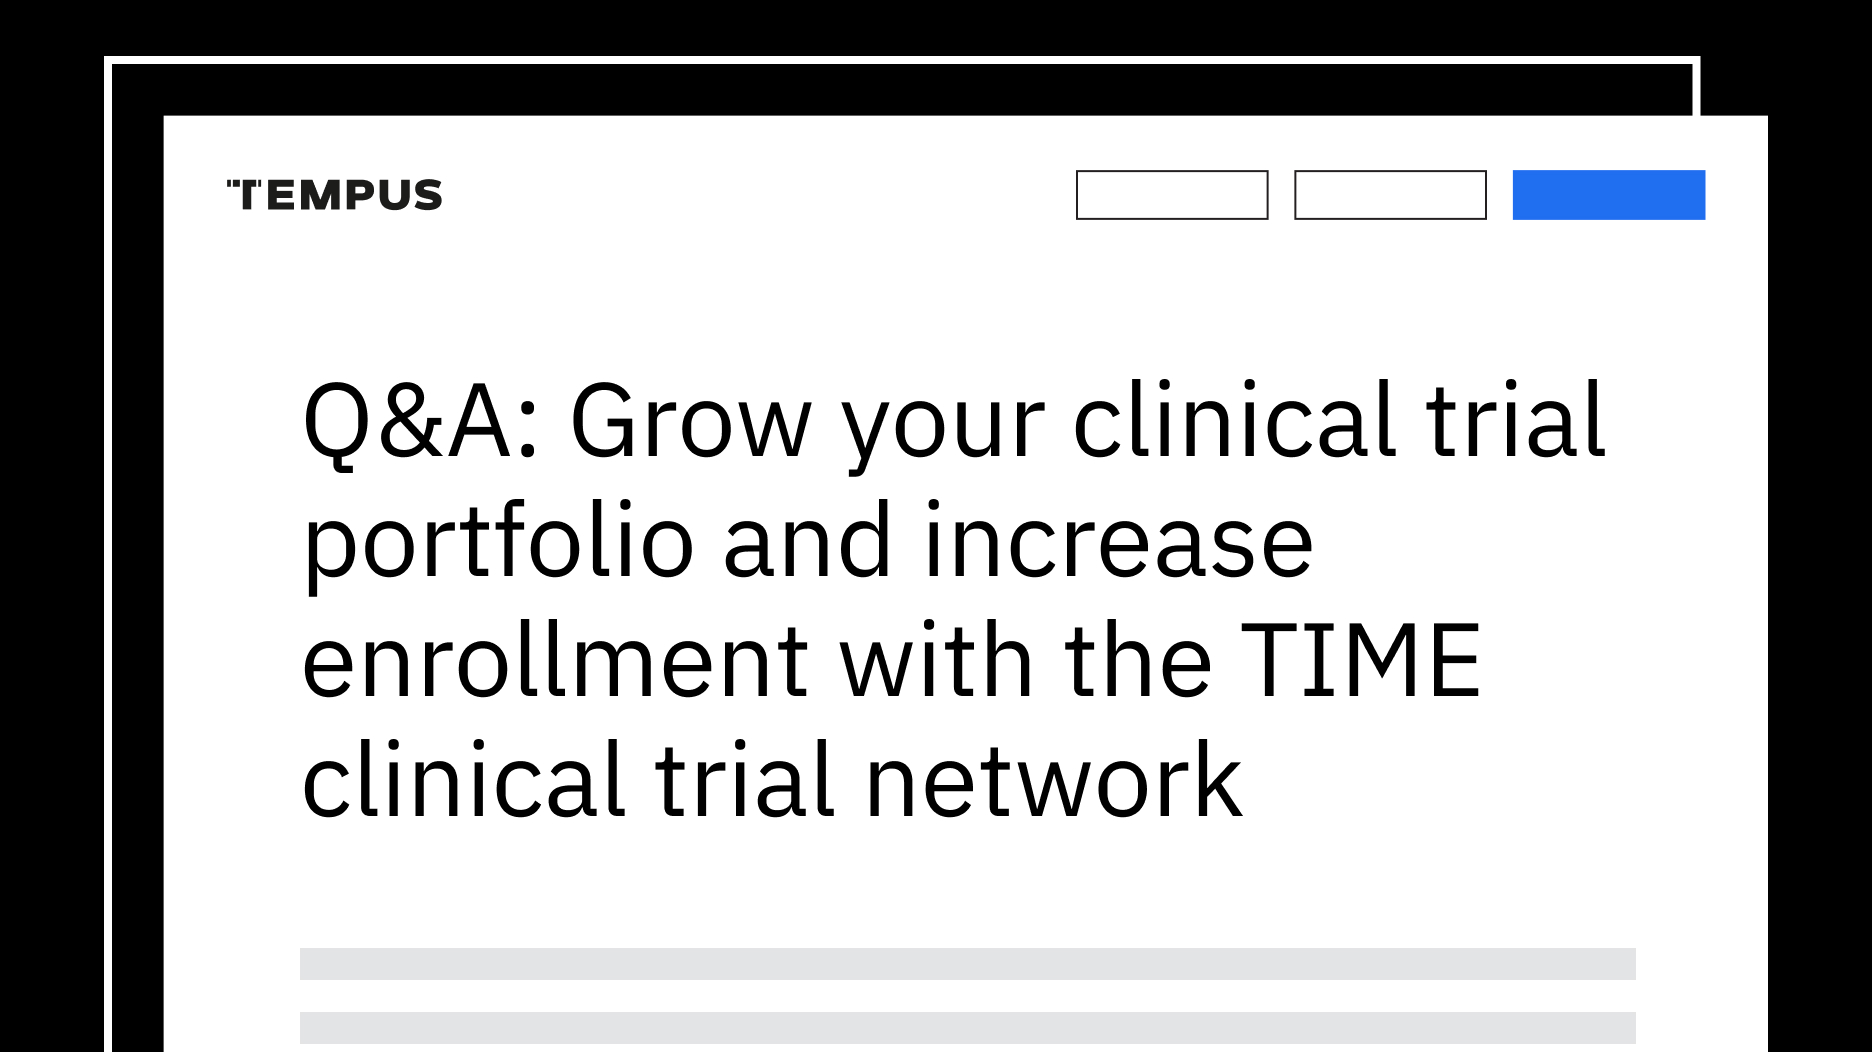 Q&A: Grow your clinical trial portfolio and increase enrollment with the TIME clinical trial network